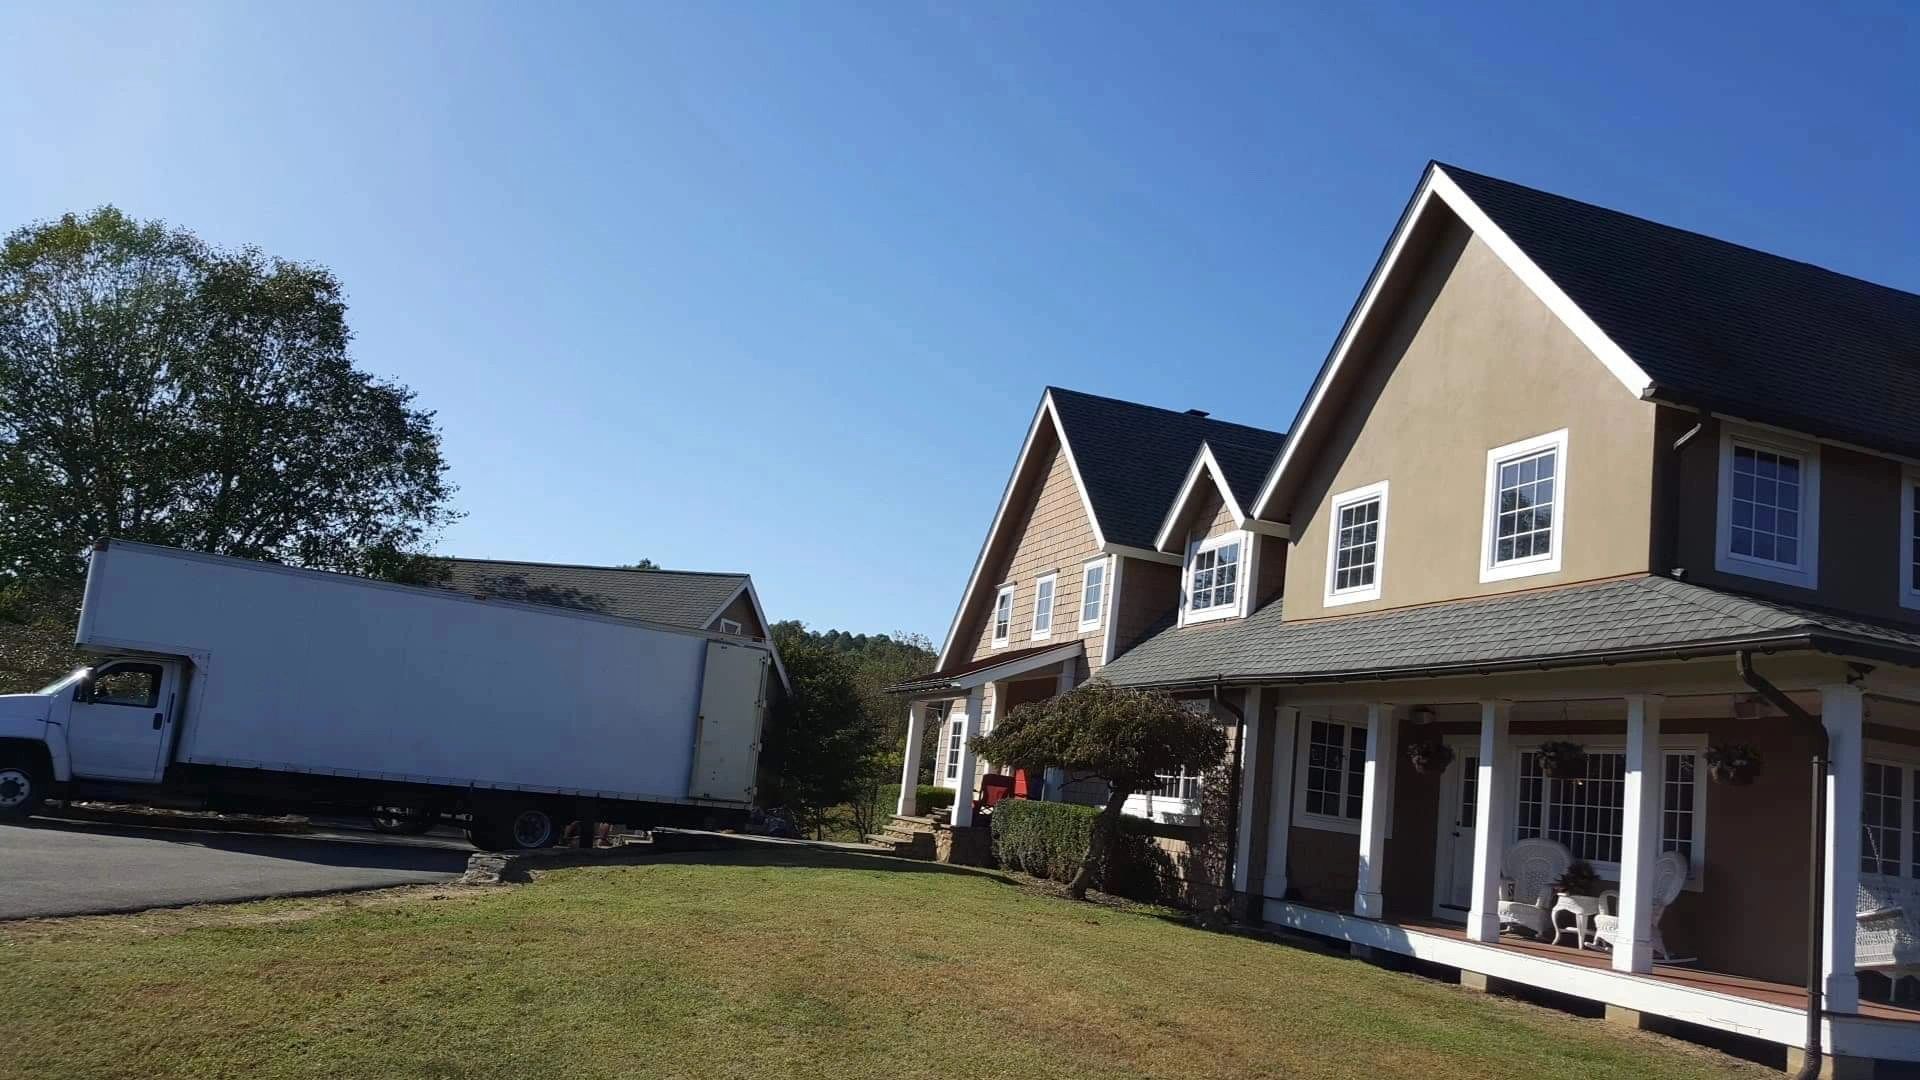 local moving company, moving service, movers in herndon, va 